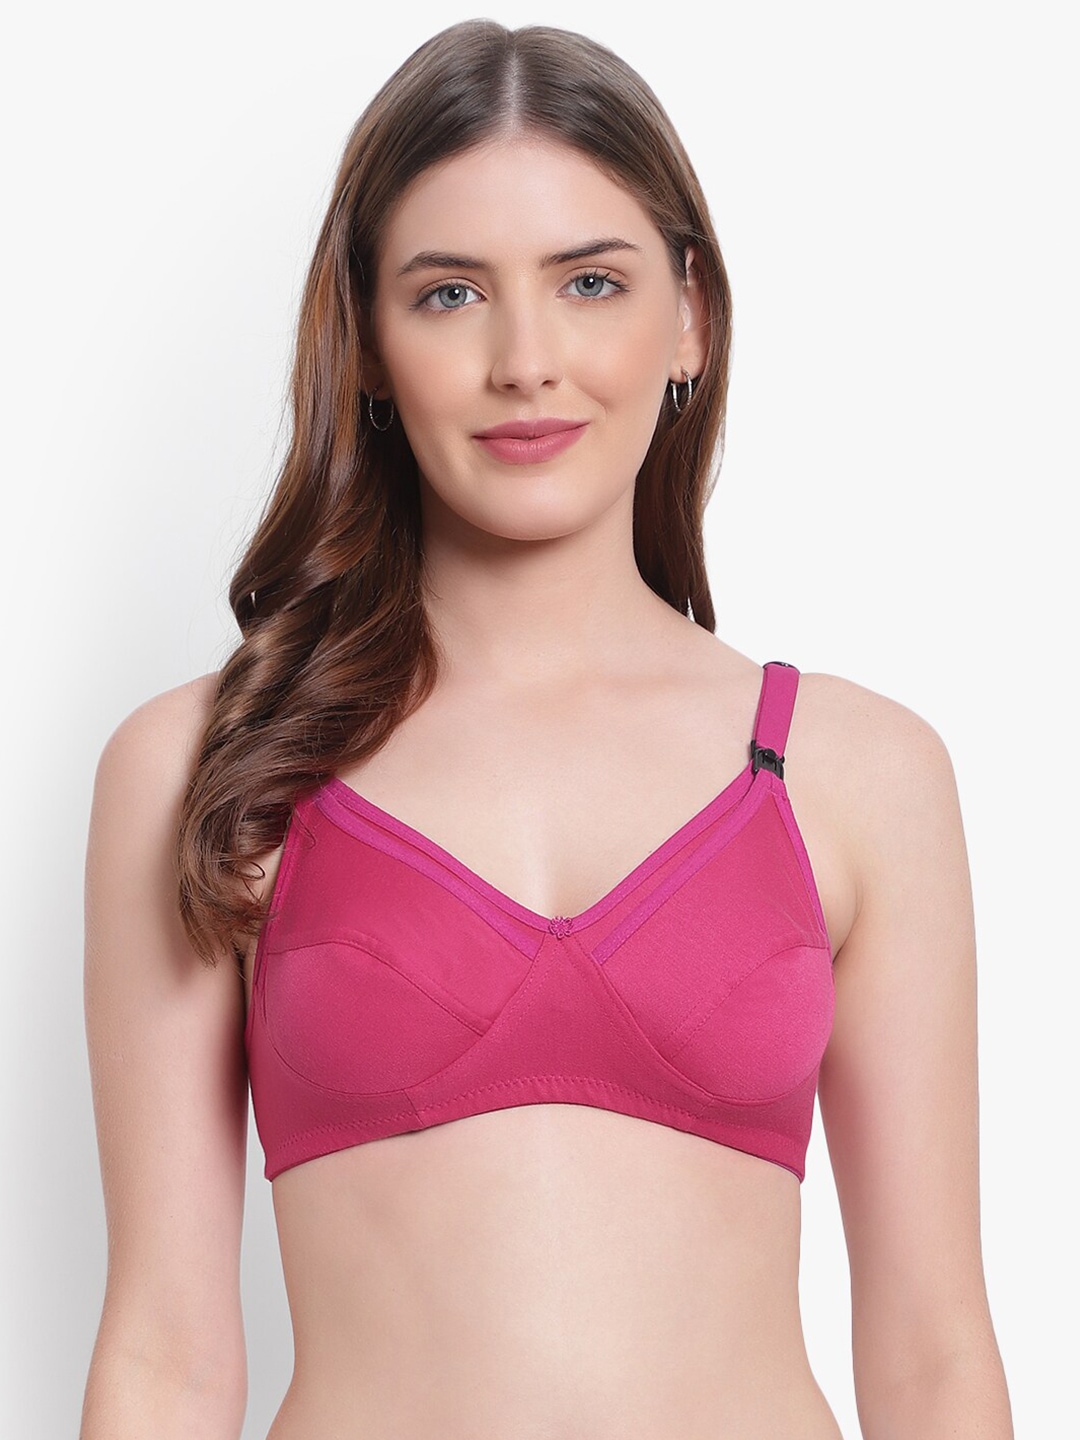 

Bruchi CLUB Full Coverage Non Padded Maternity Bra With All Day Comfort, Pink